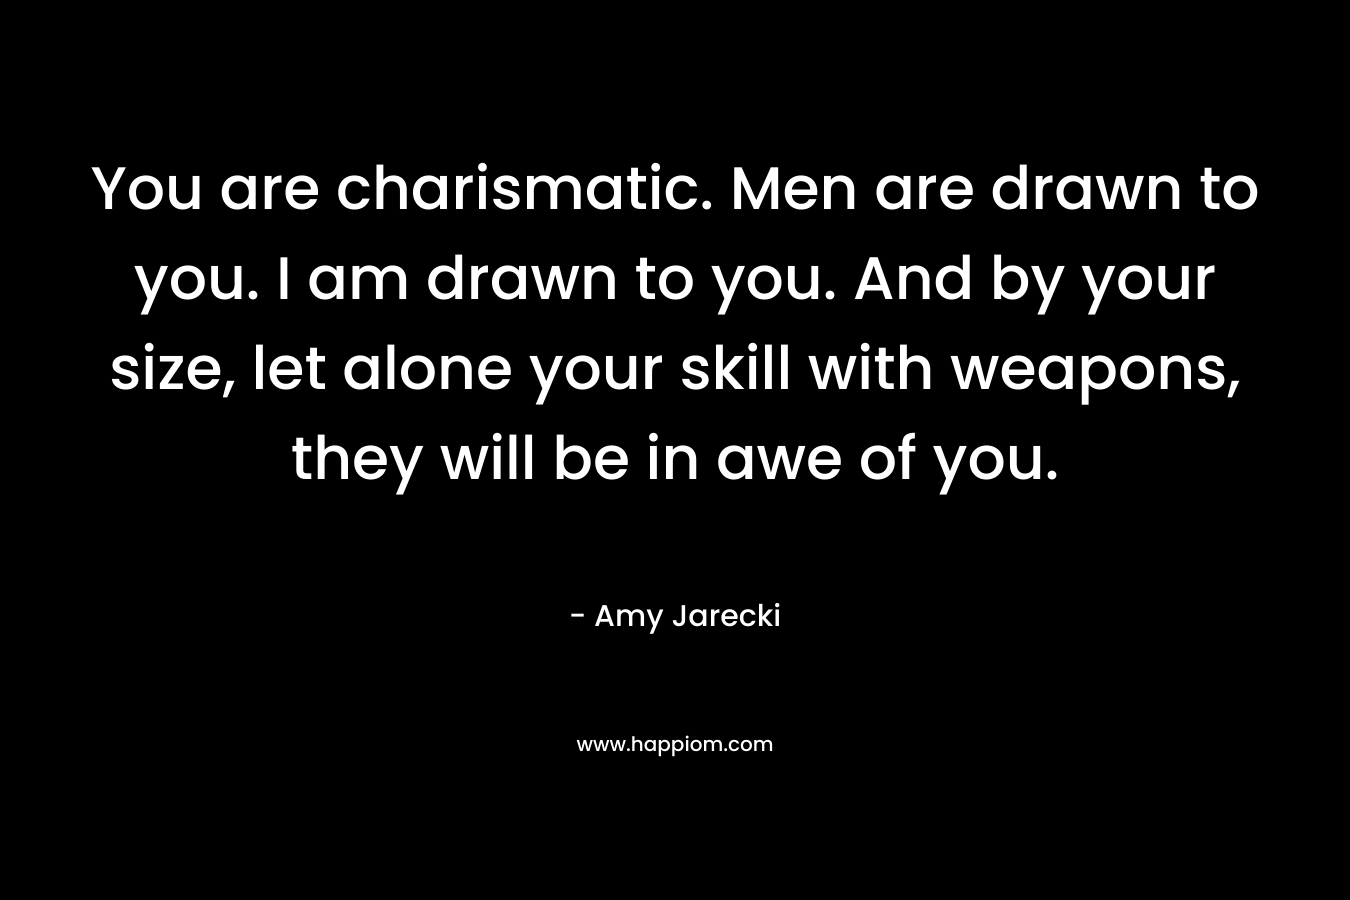 You are charismatic. Men are drawn to you. I am drawn to you. And by your size, let alone your skill with weapons, they will be in awe of you.